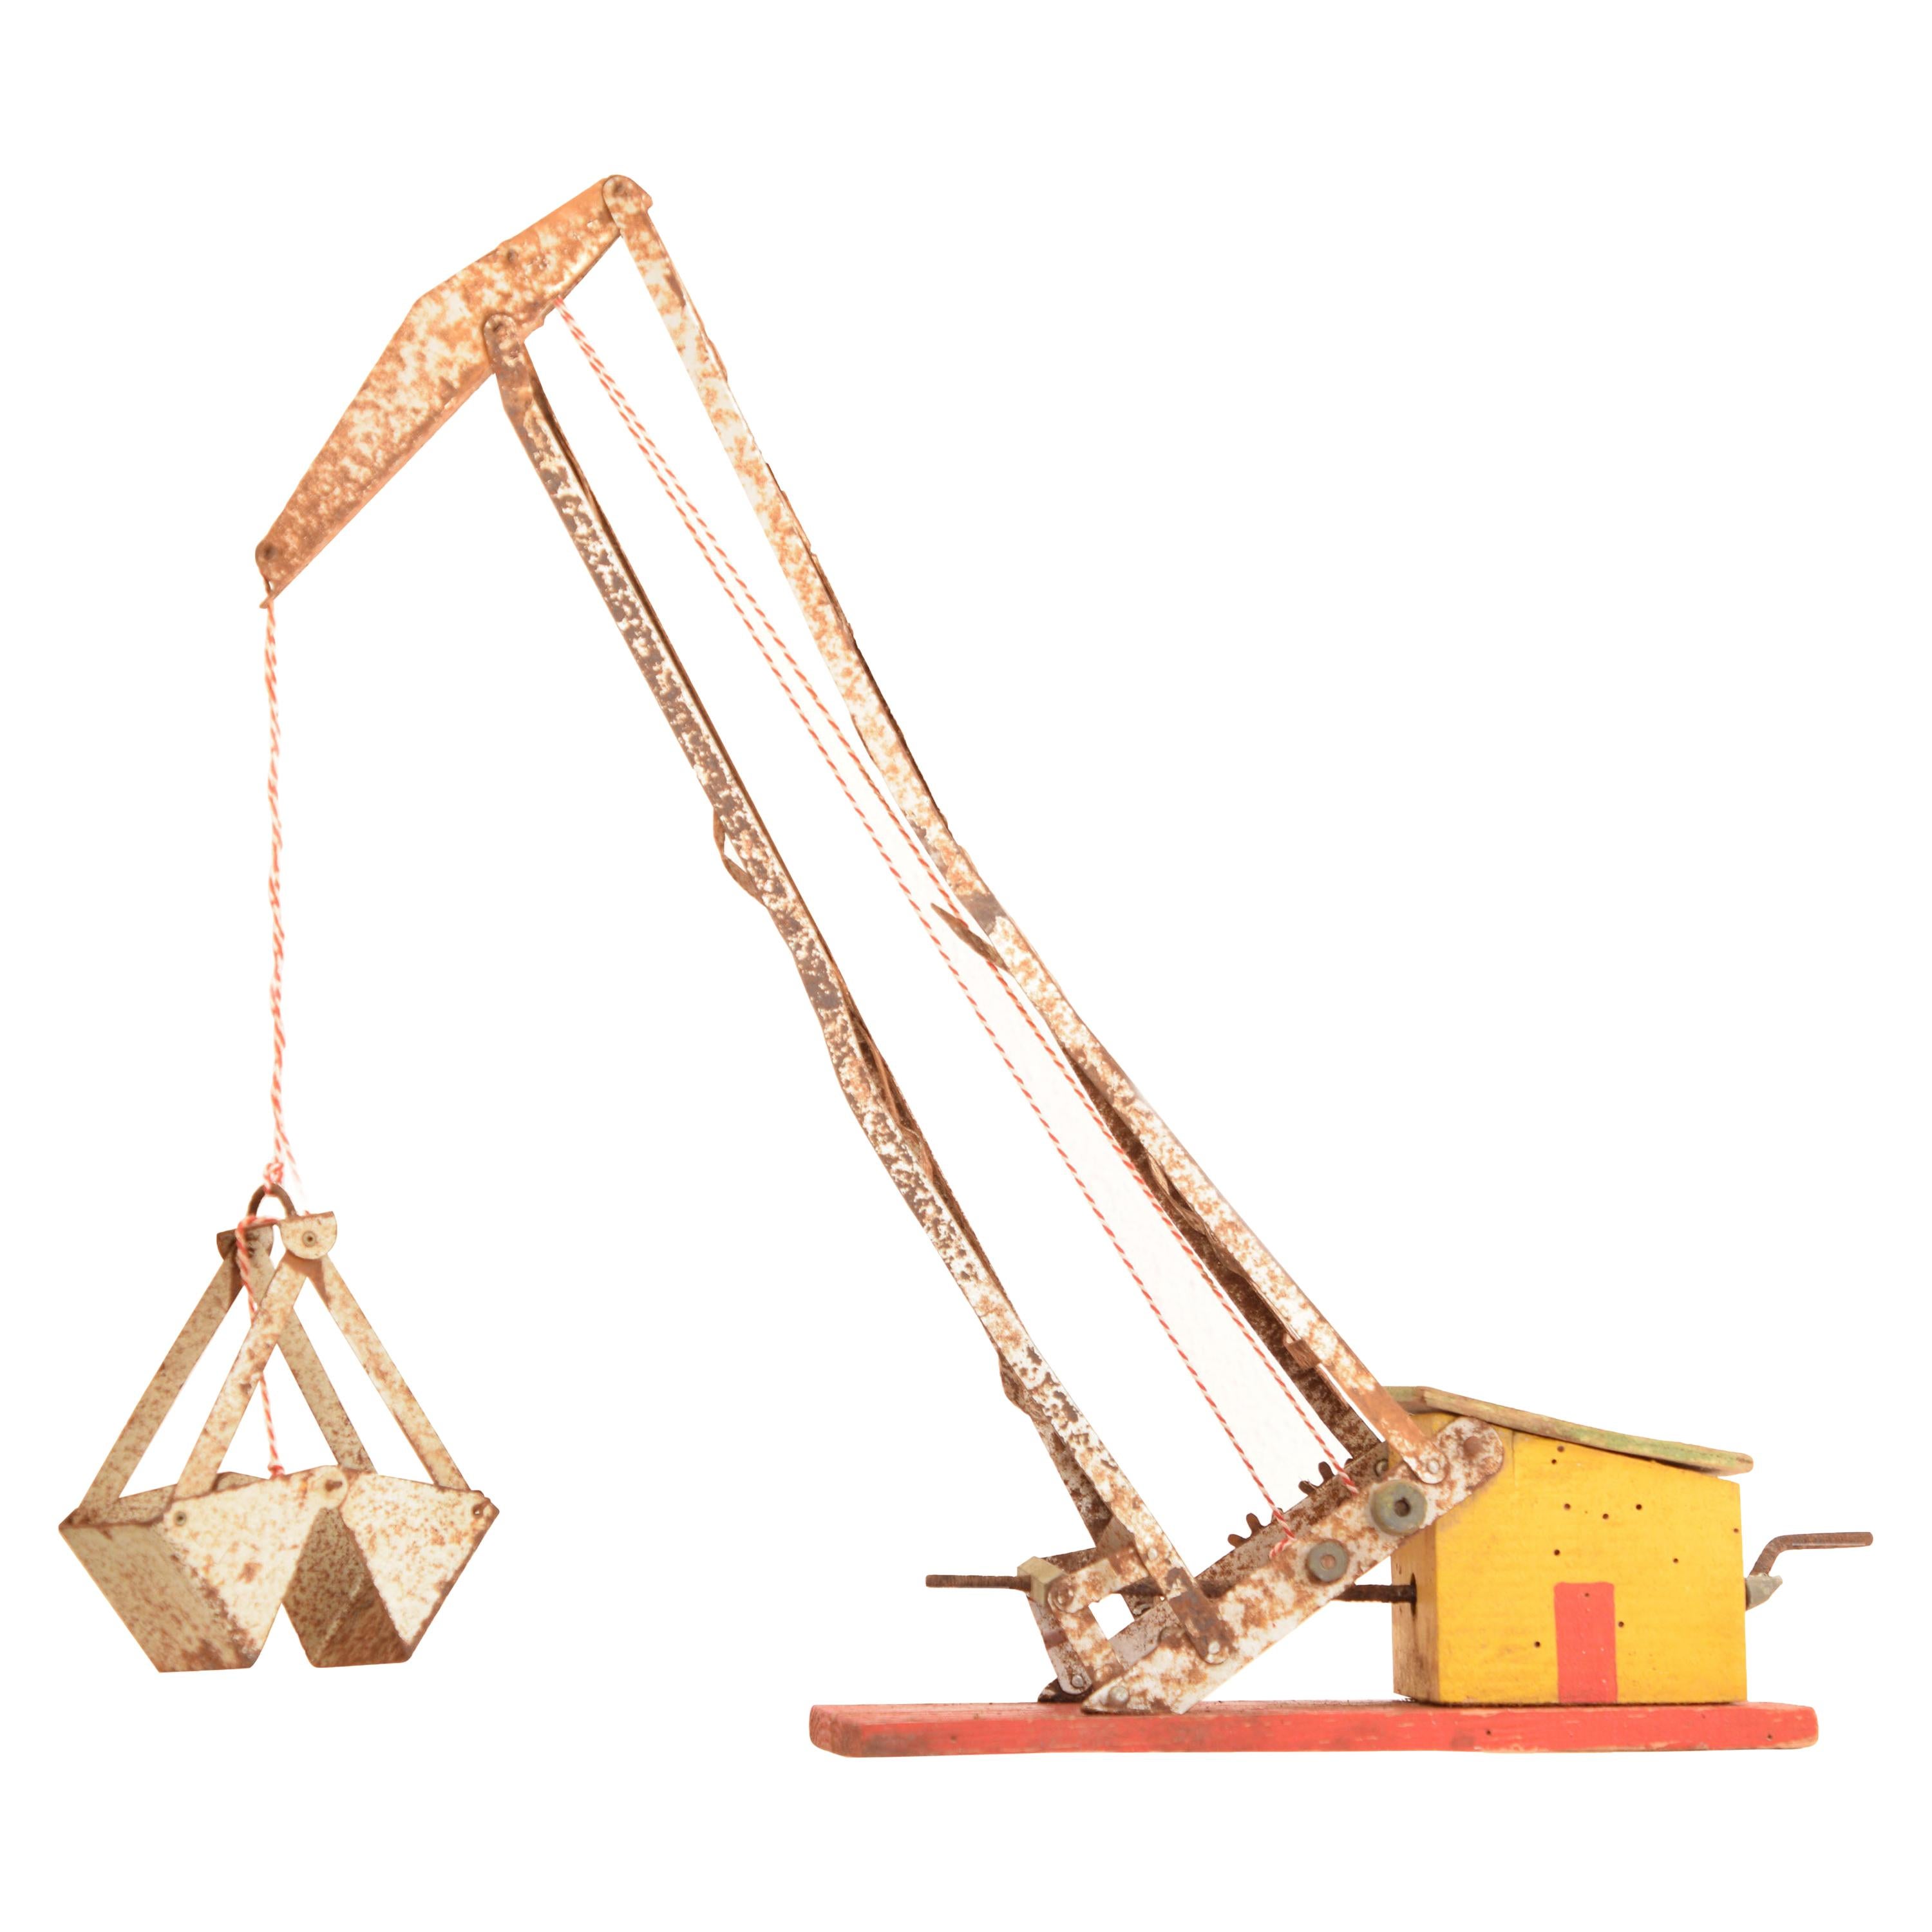 Buy Wholesale tower crane toy For Vintage Collections And Display 